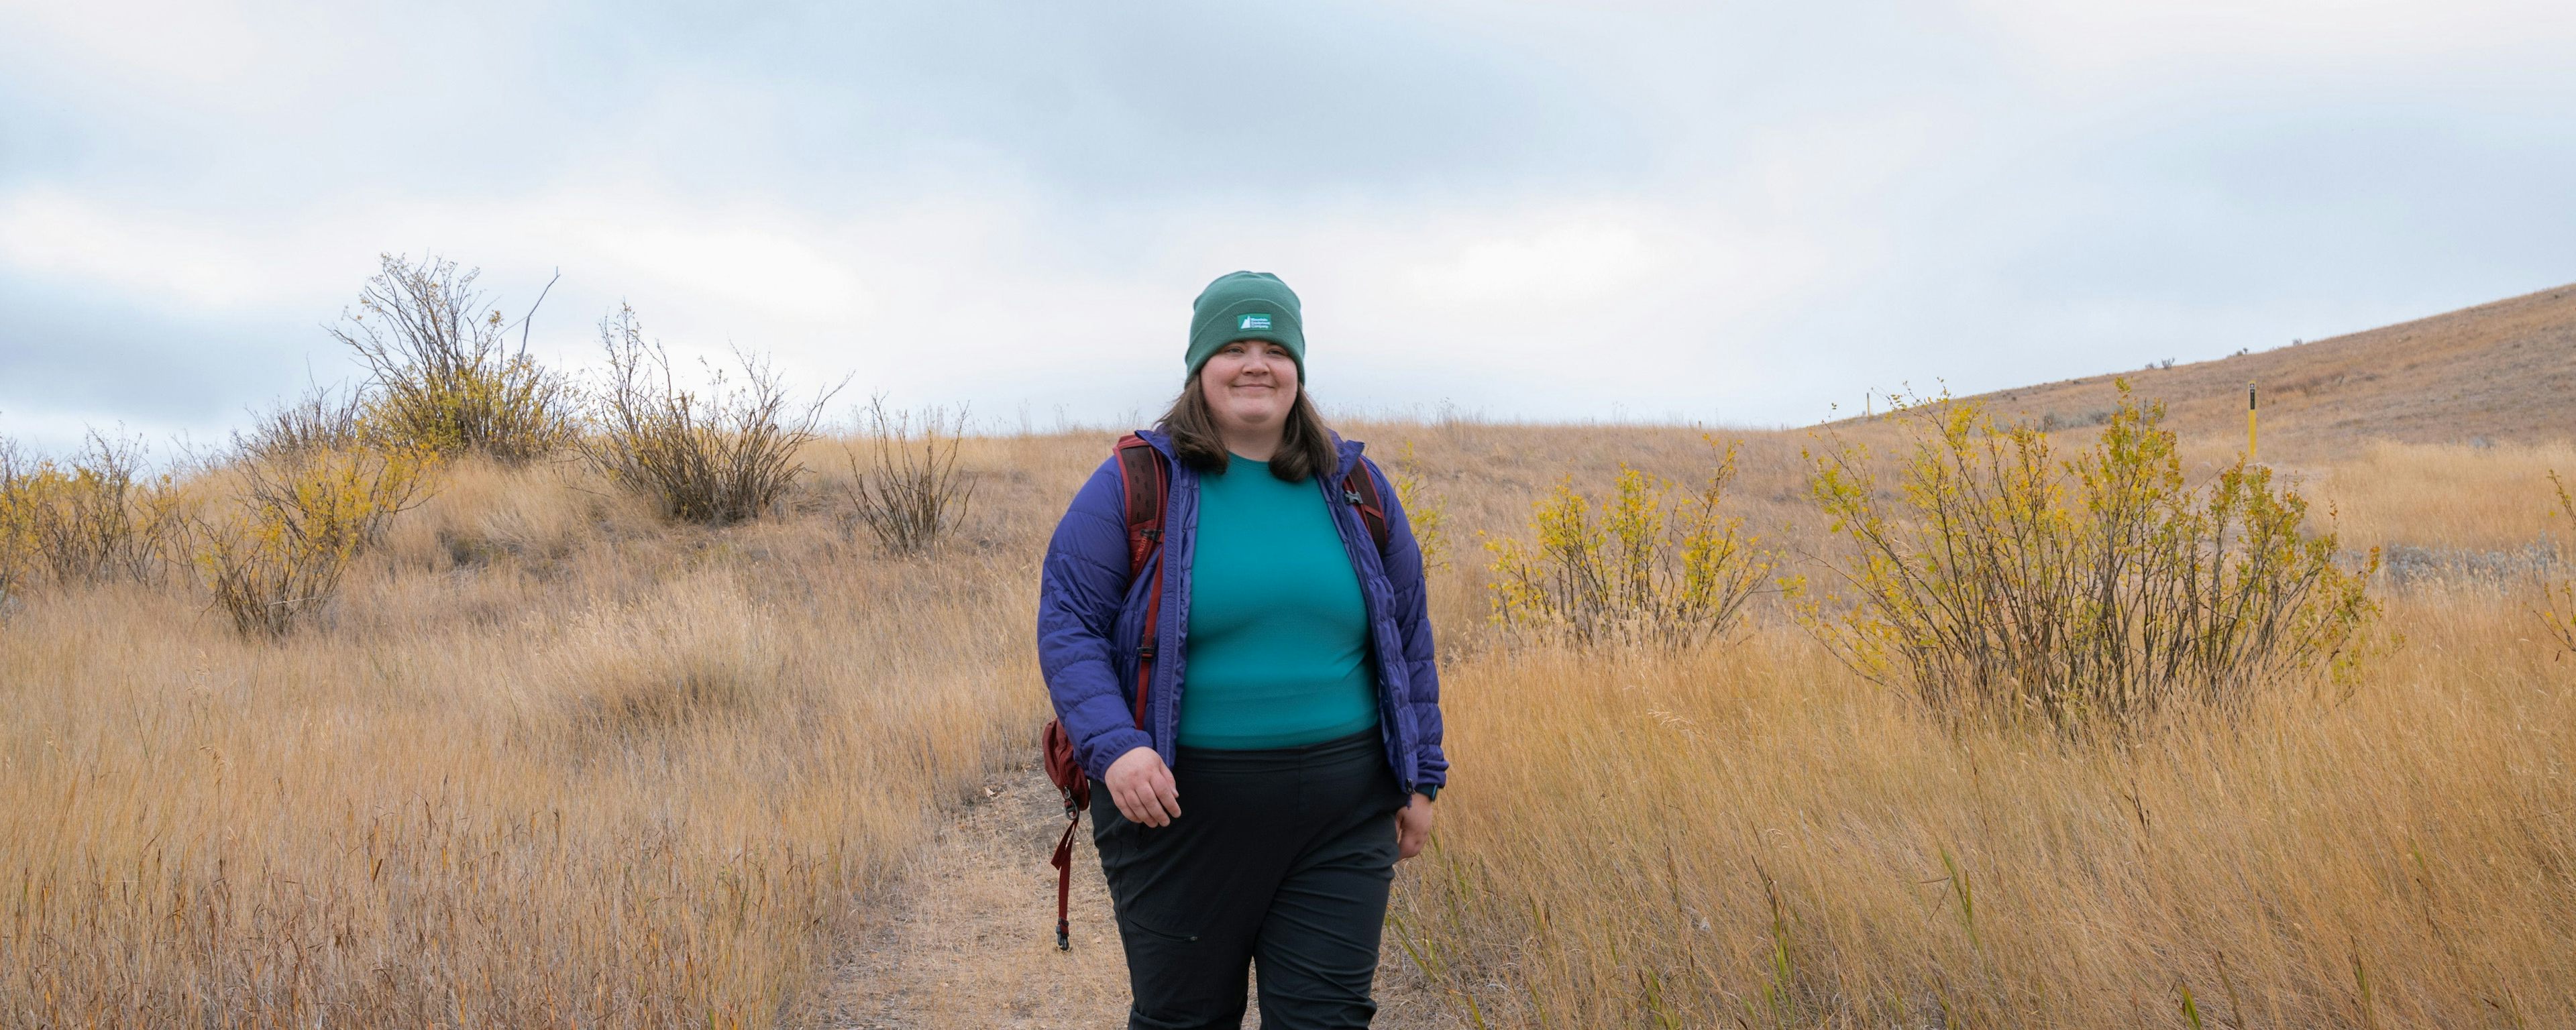 Kaila hikes in Grasslands National Park in her MEC Borderland Pants, MEC Uplink Jacket in Wild Berry, T0 Base Layer Long Sleeve Shirt in Alpine Sage and MEC Classic Beanie.